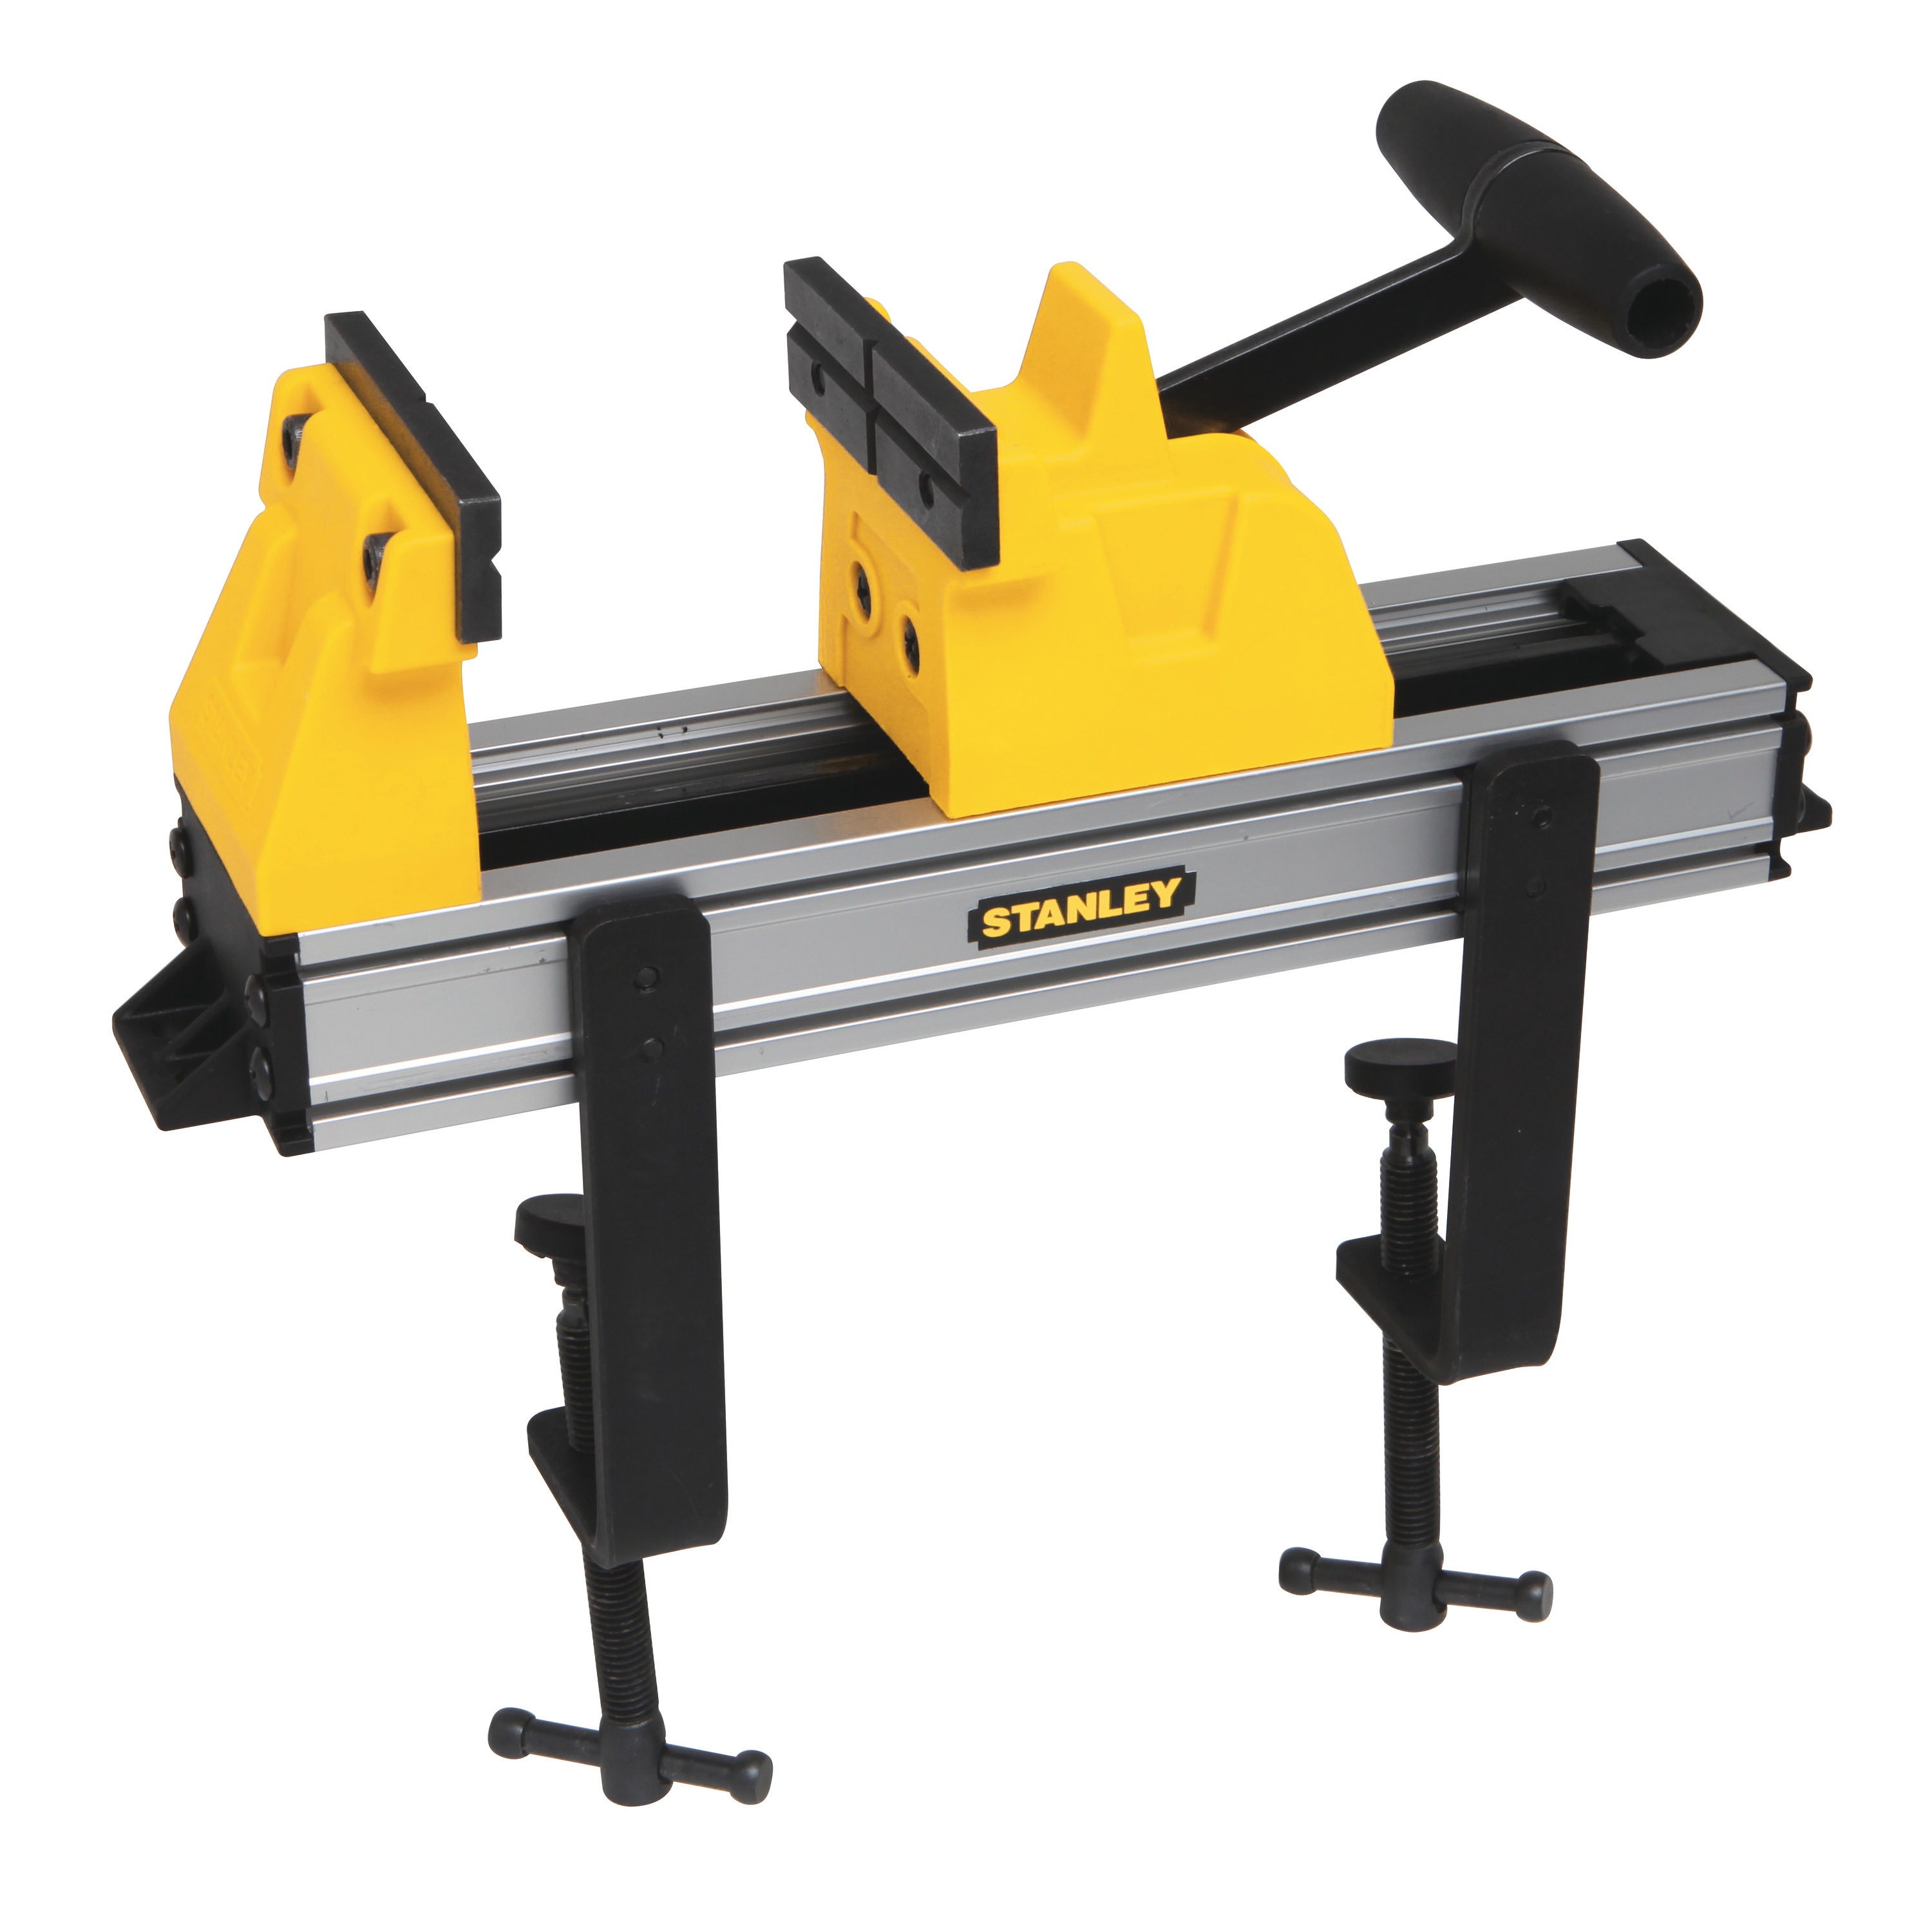 Stanley Tools - 438 Jaw Capacity Quick Vise - STHT83179